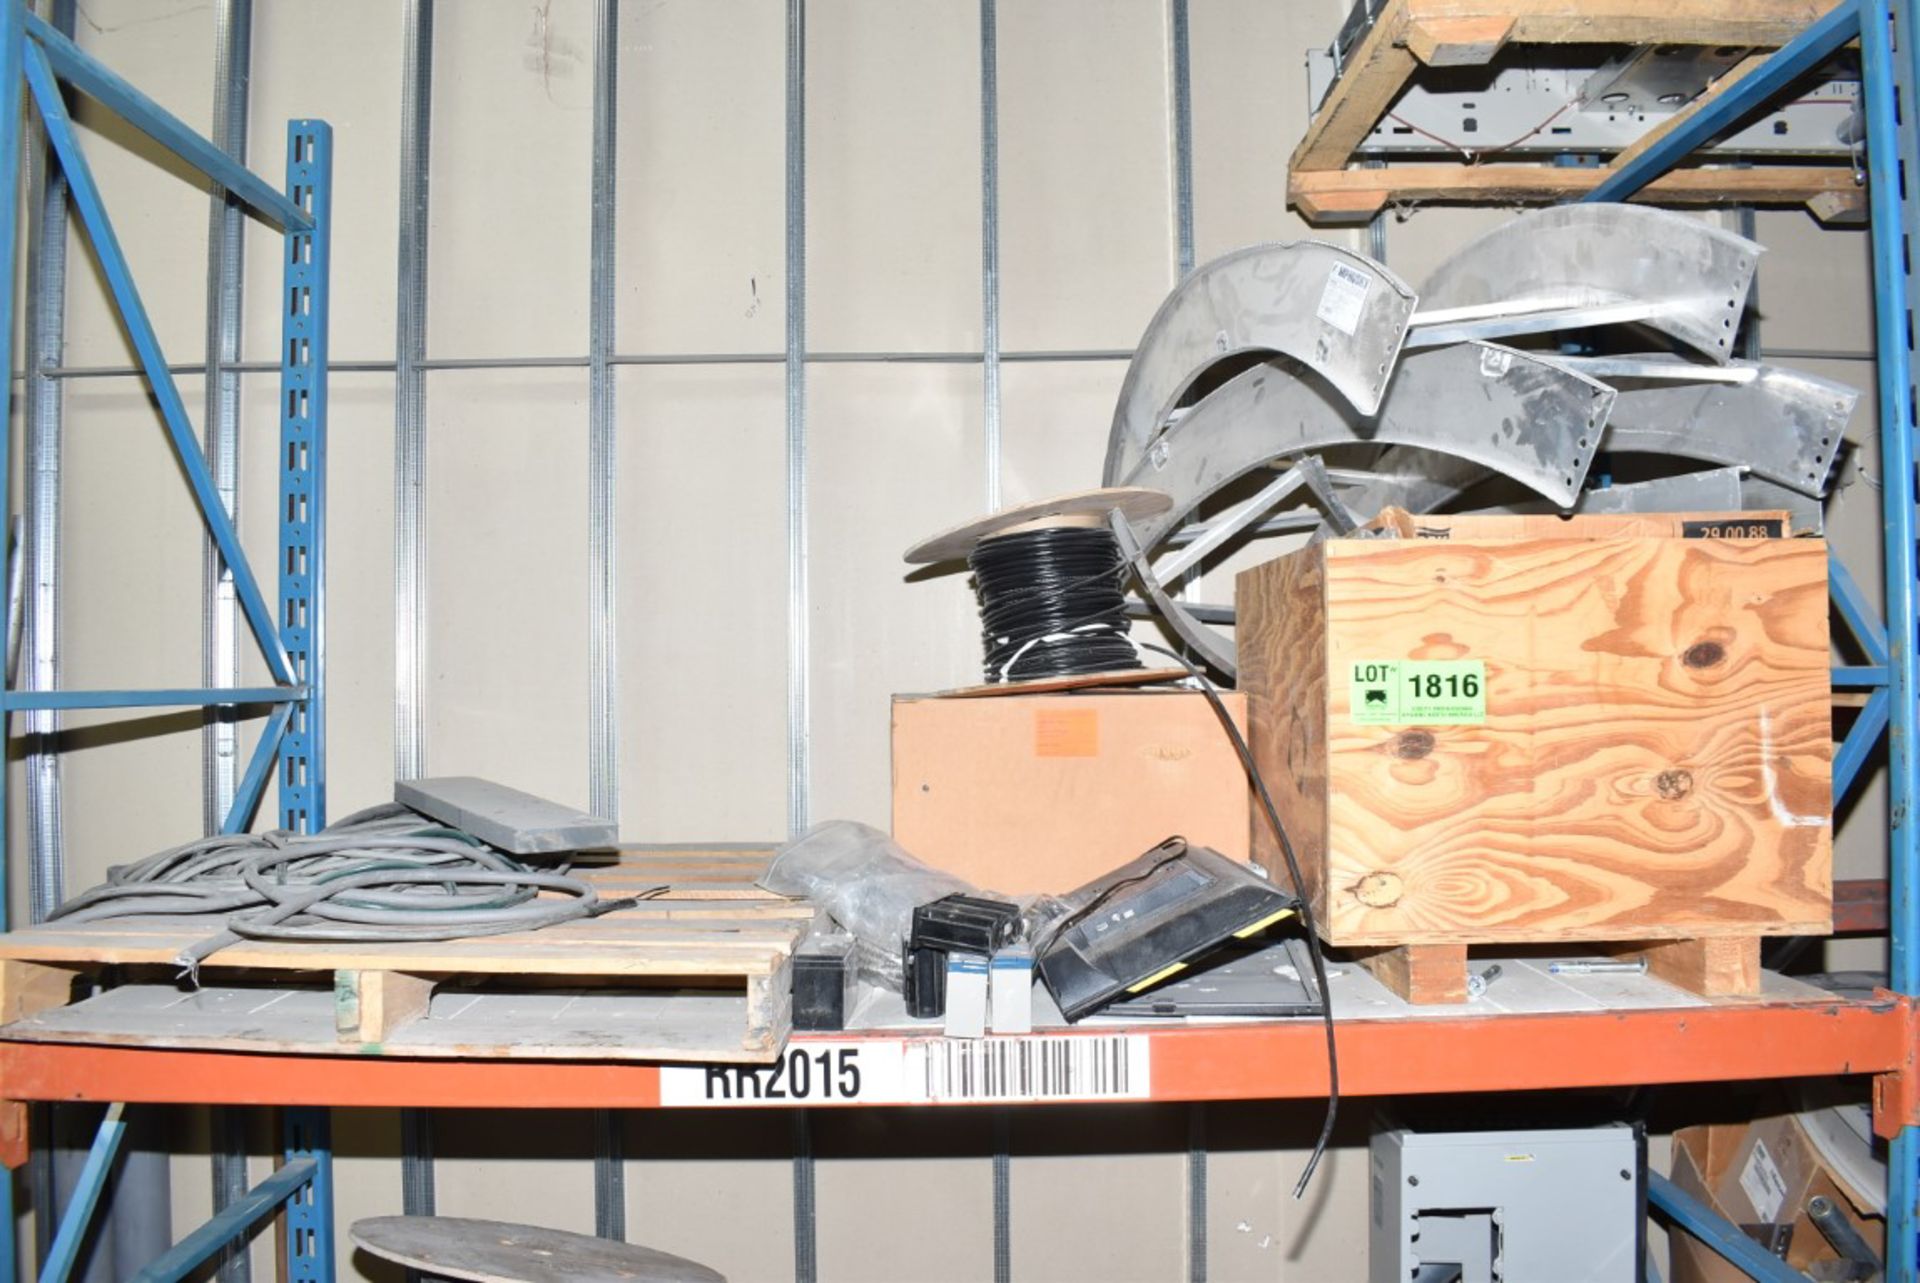 LOT/ CONTENTS OF SHELF - INCLUDING ALUMINUM CABLE TROUGH, SPARE PARTS [RIGGING FEE FOR LOT #